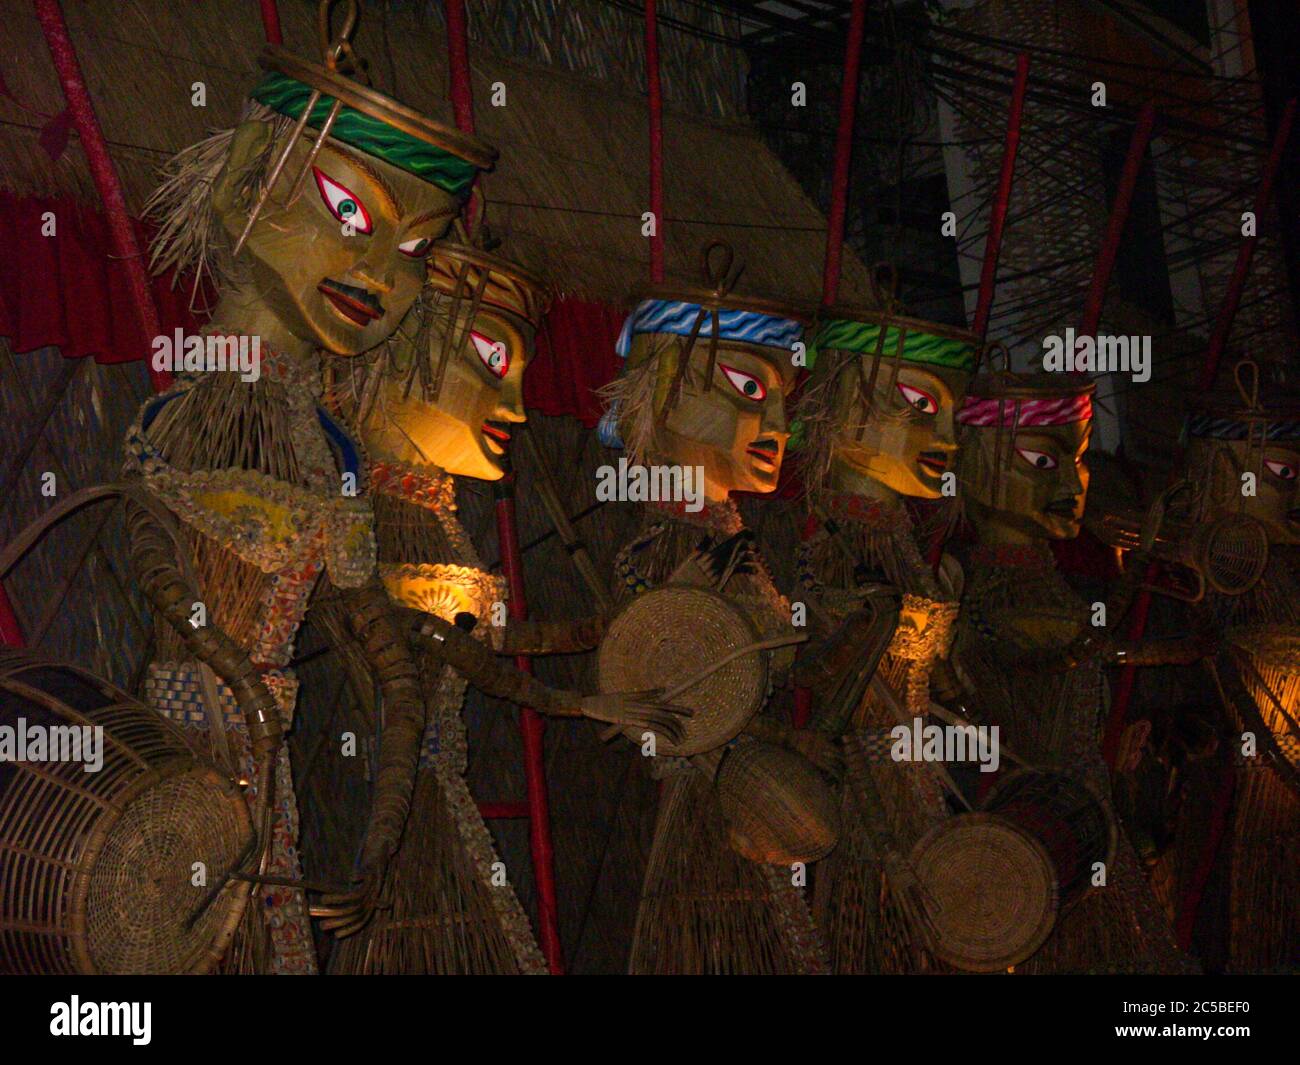 band of musicians made with bamboo sticks and jute by tribal people of bengal Stock Photo